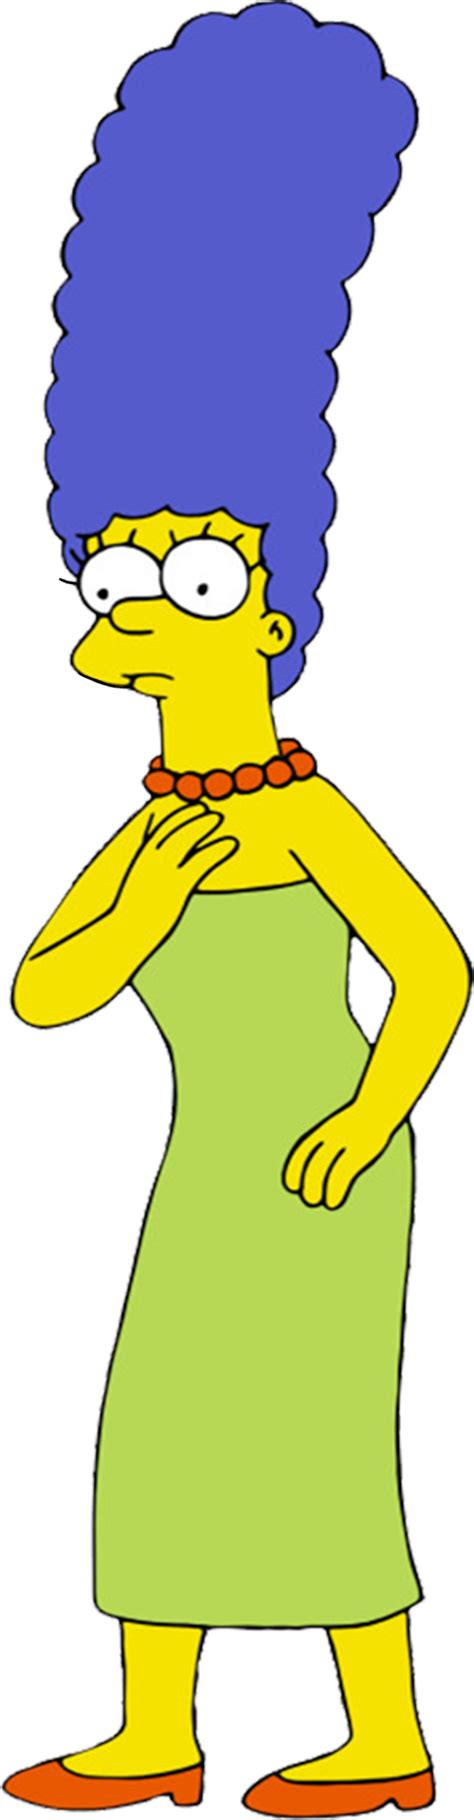 Marge Simpson Vector 8 By Homersimpson1983 On Deviantart